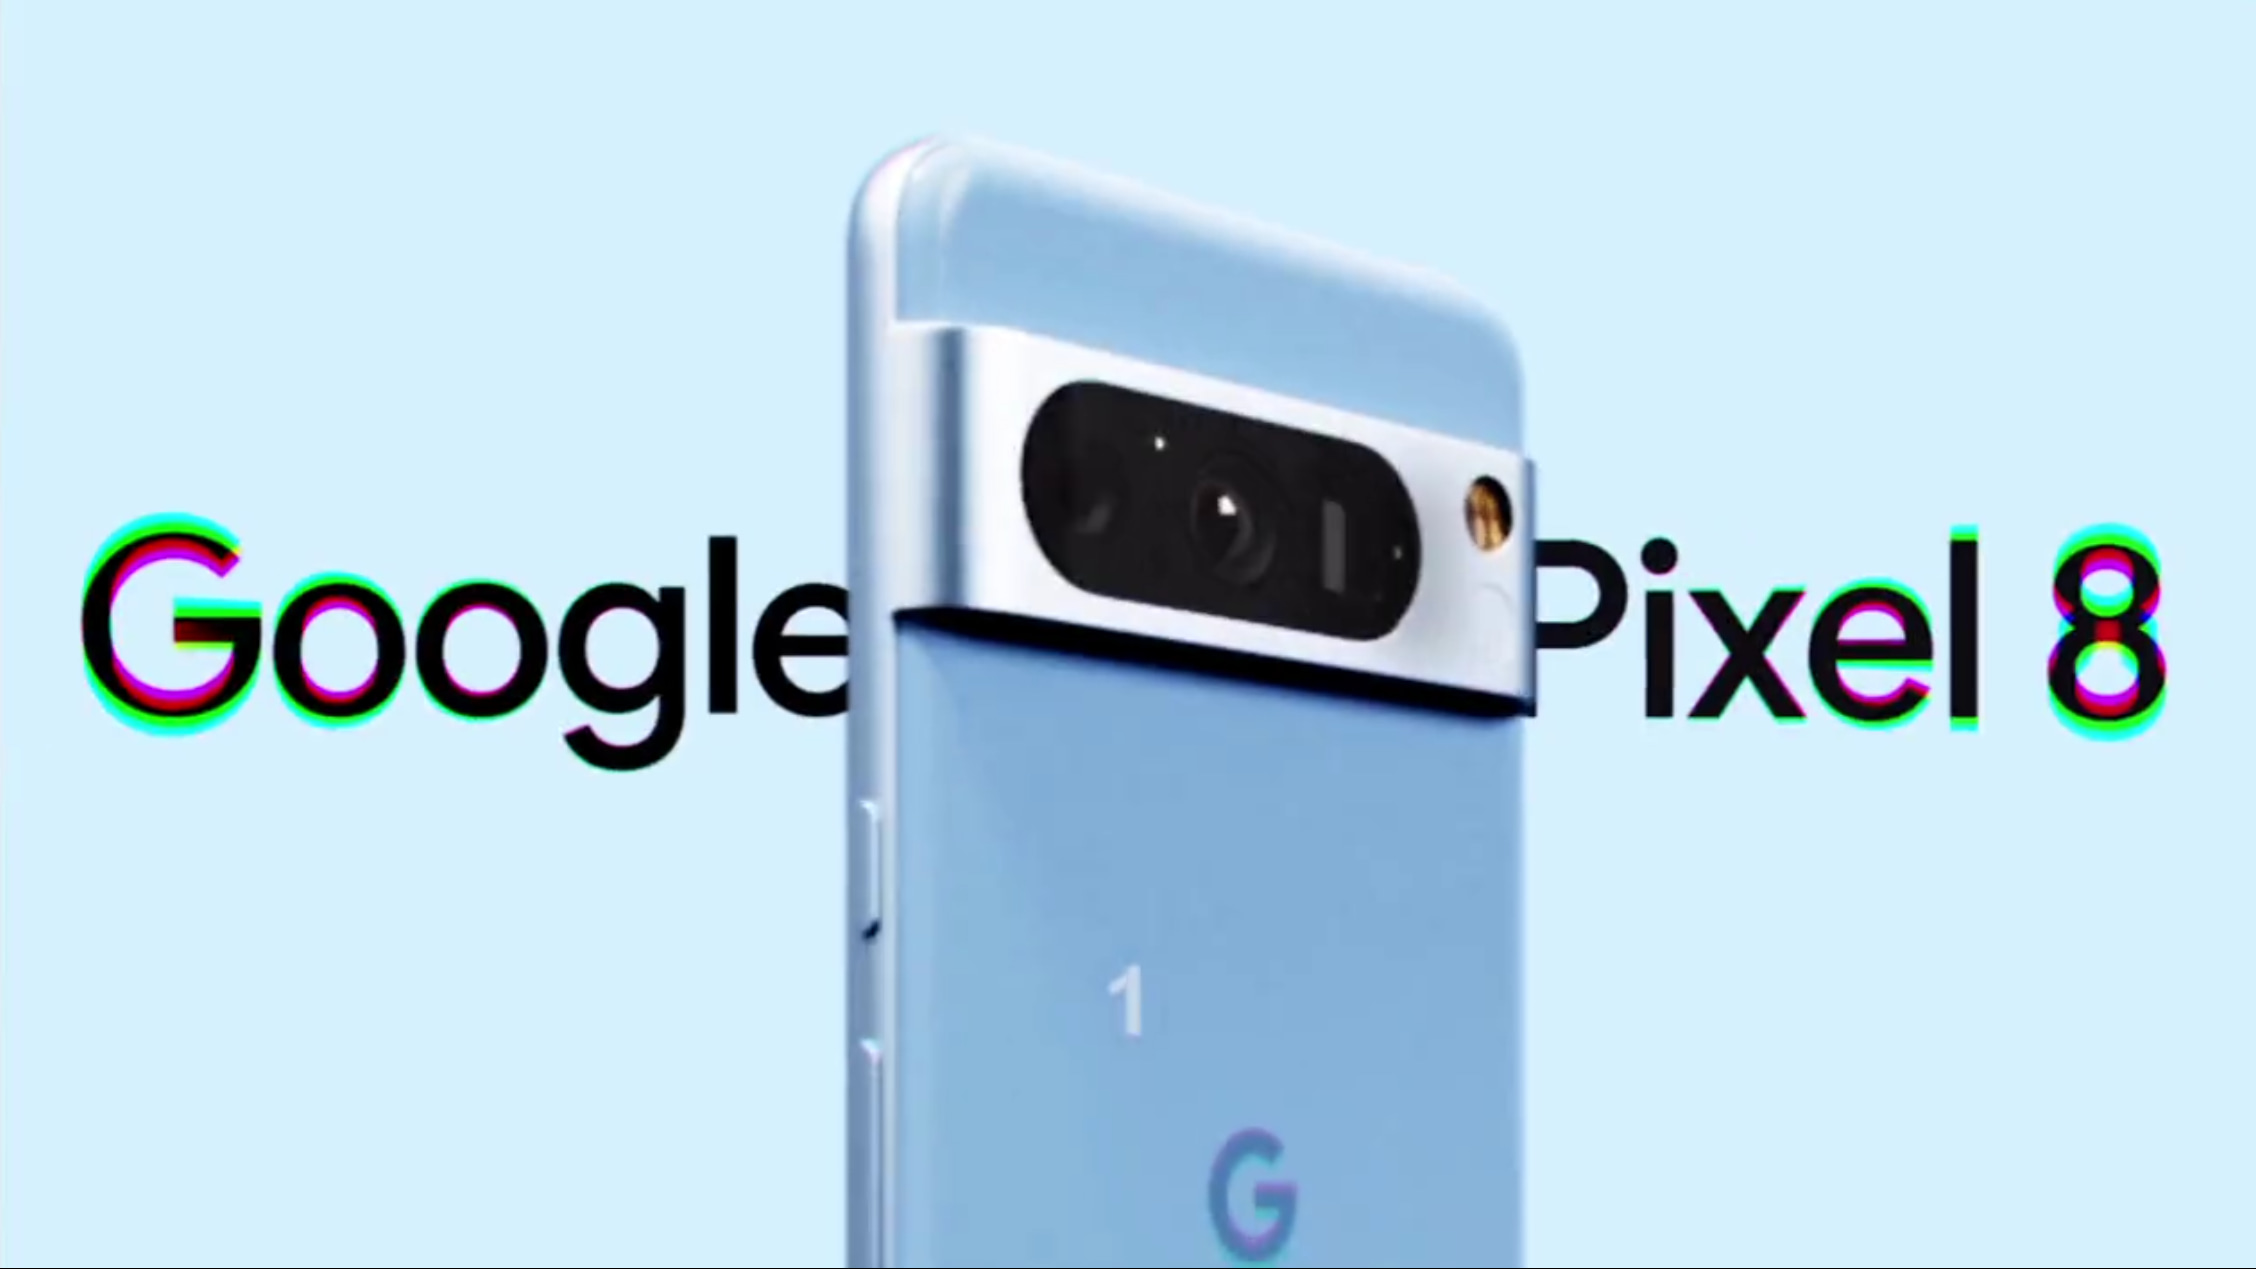 Google Pixel 5 Just Black Unboxing and Overview 